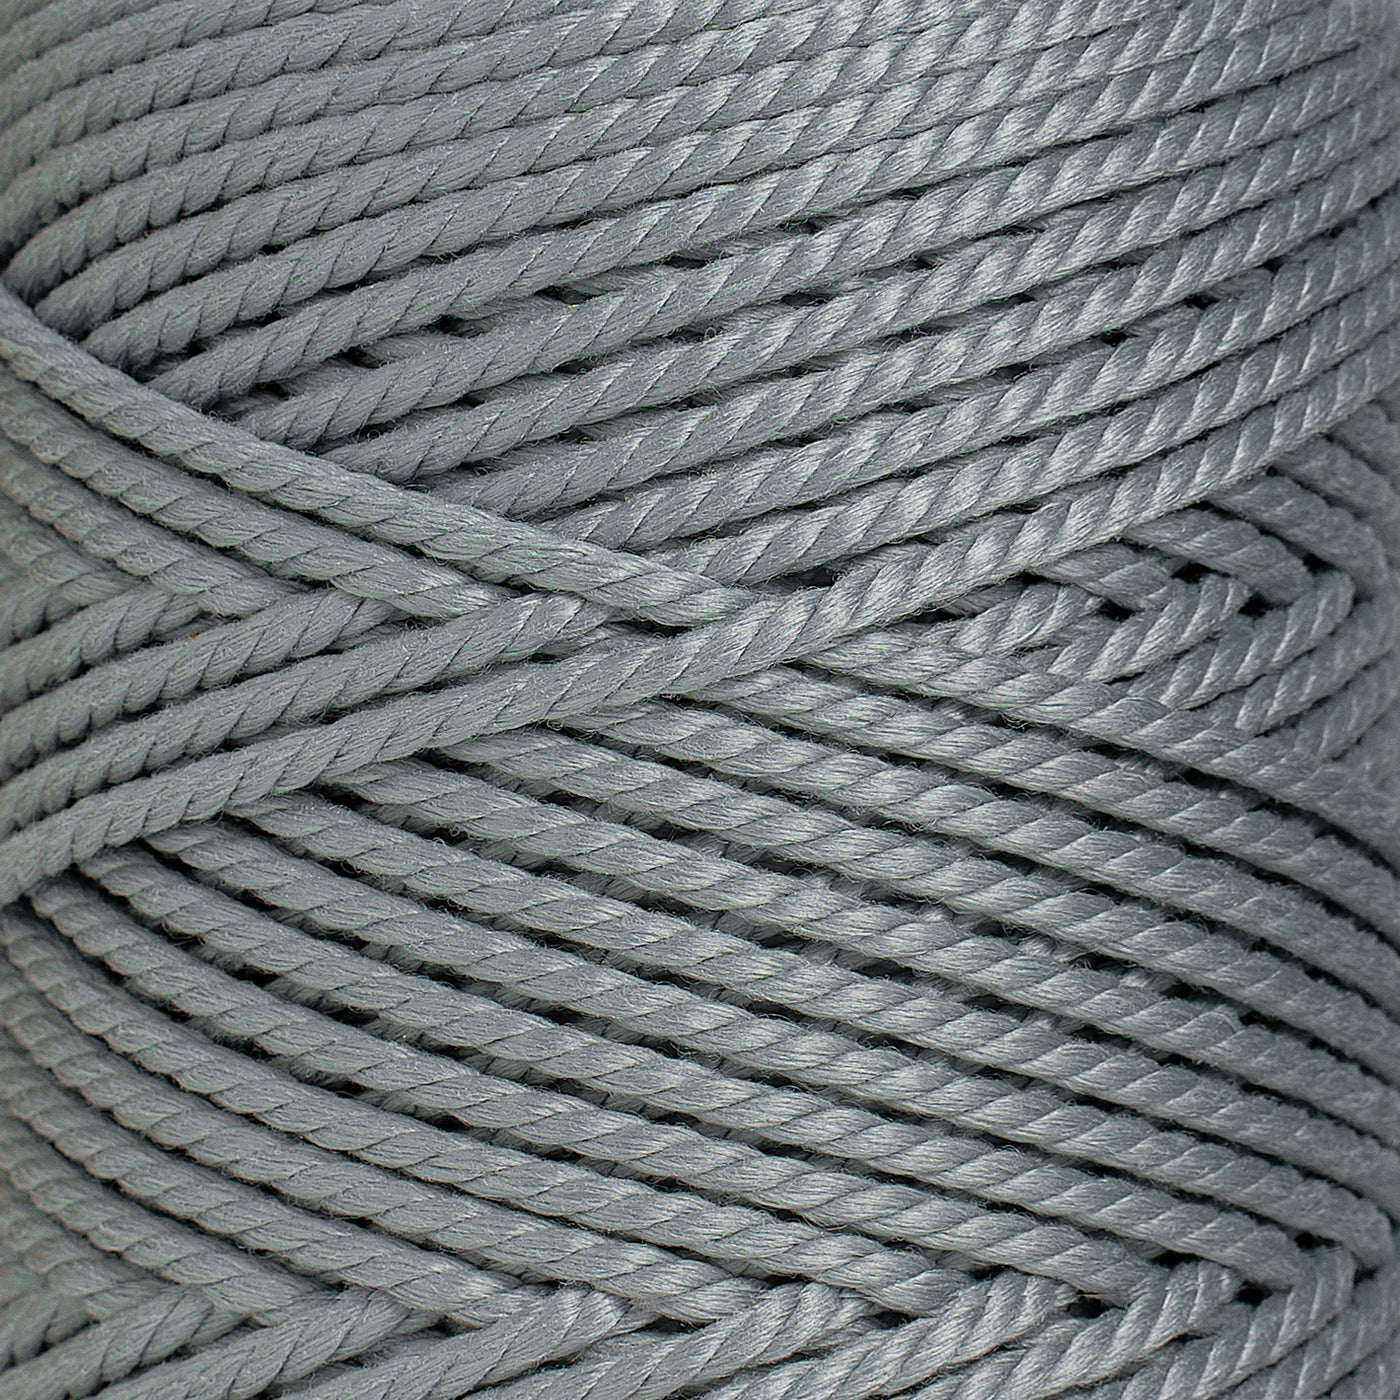 OUTDOOR RECYCLED CORD 3 MM - 3 PLY -  SOFT GRAY COLOR